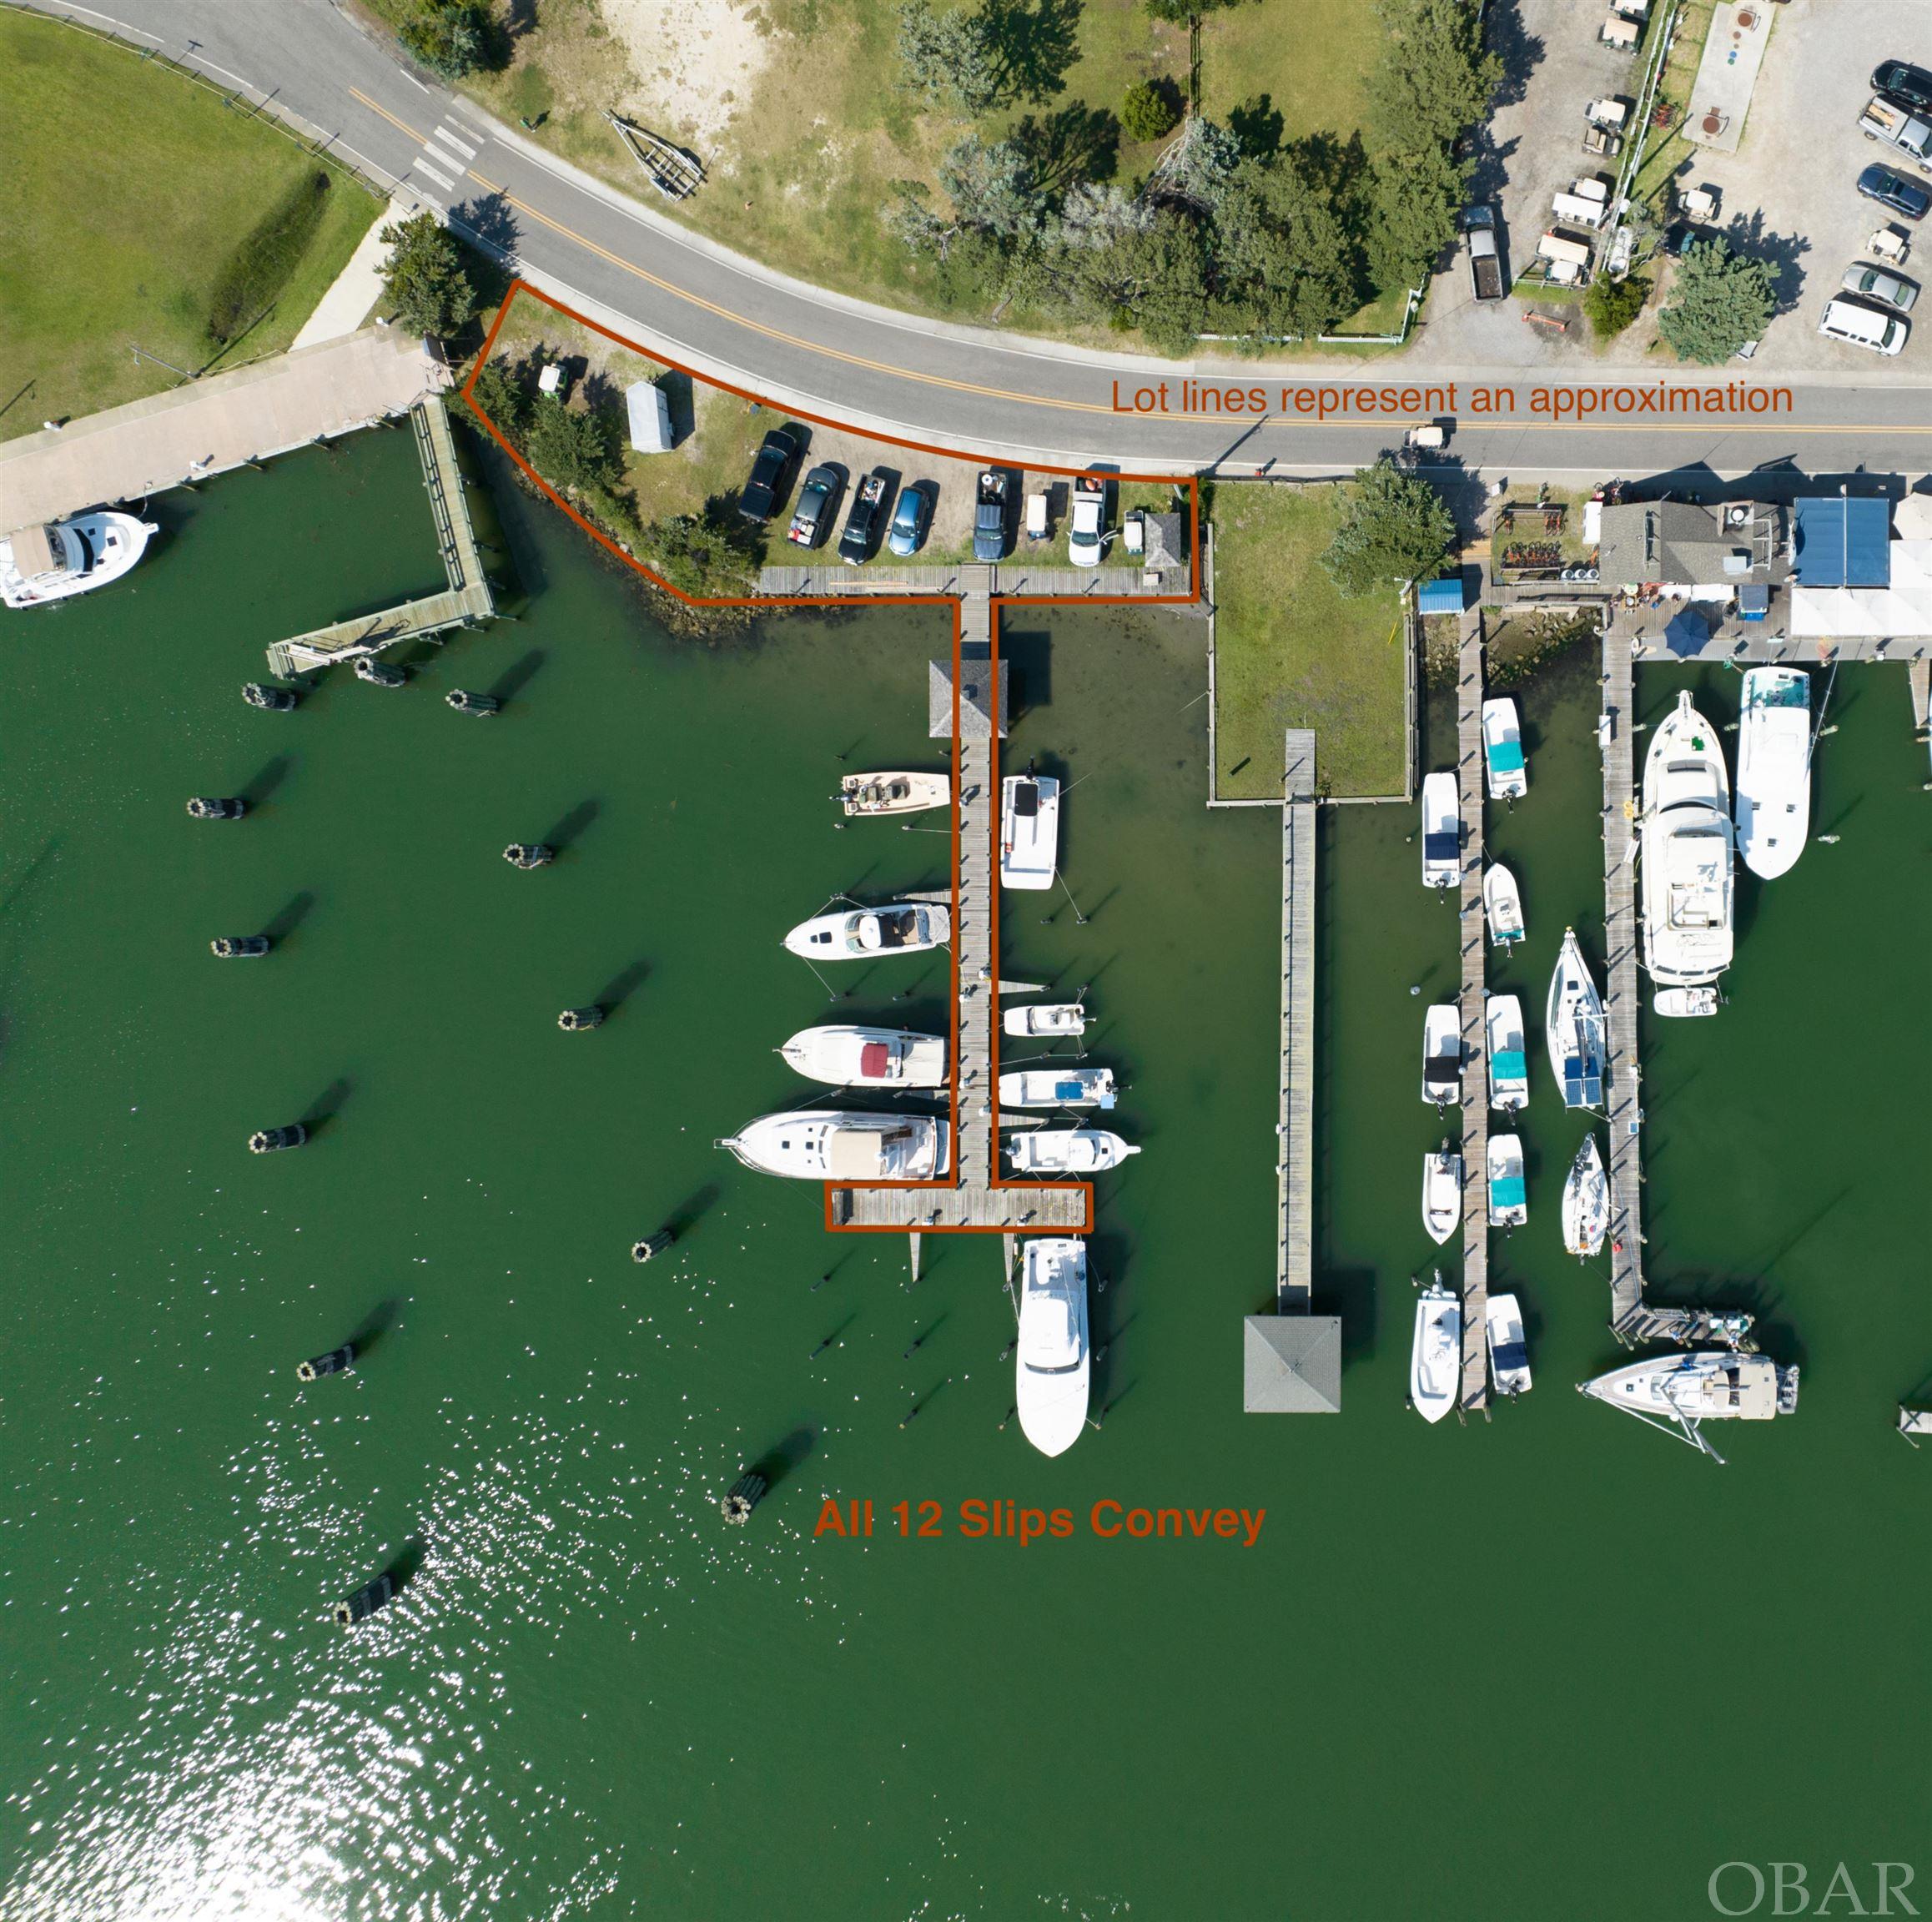 Opportunity to own a 12 slip marina located in a prime commercial and residential location on Silver Lake. The available dockage is suitable for deep draft offshore fishing vessels, recreational fishing boats, and sailboats. 156 feet of road frontage on Highway 12. Ample parking available on 5,800 sq ft of land, adjacent to docks and Highway 12, that also conveys with the pier. Power and water connections on site. Three deep water slips at the end of pier accommodate vessels up to 55' length, 18' beam, and depths up to 12'. Slips range in size from 18'-12' beam and 55'-23' length. Approximation of depth, beam, and length per slip available in supporting documents. Permissible temporary structures could be built on adjacent land. Located between the NPS docks and the Anchorage.